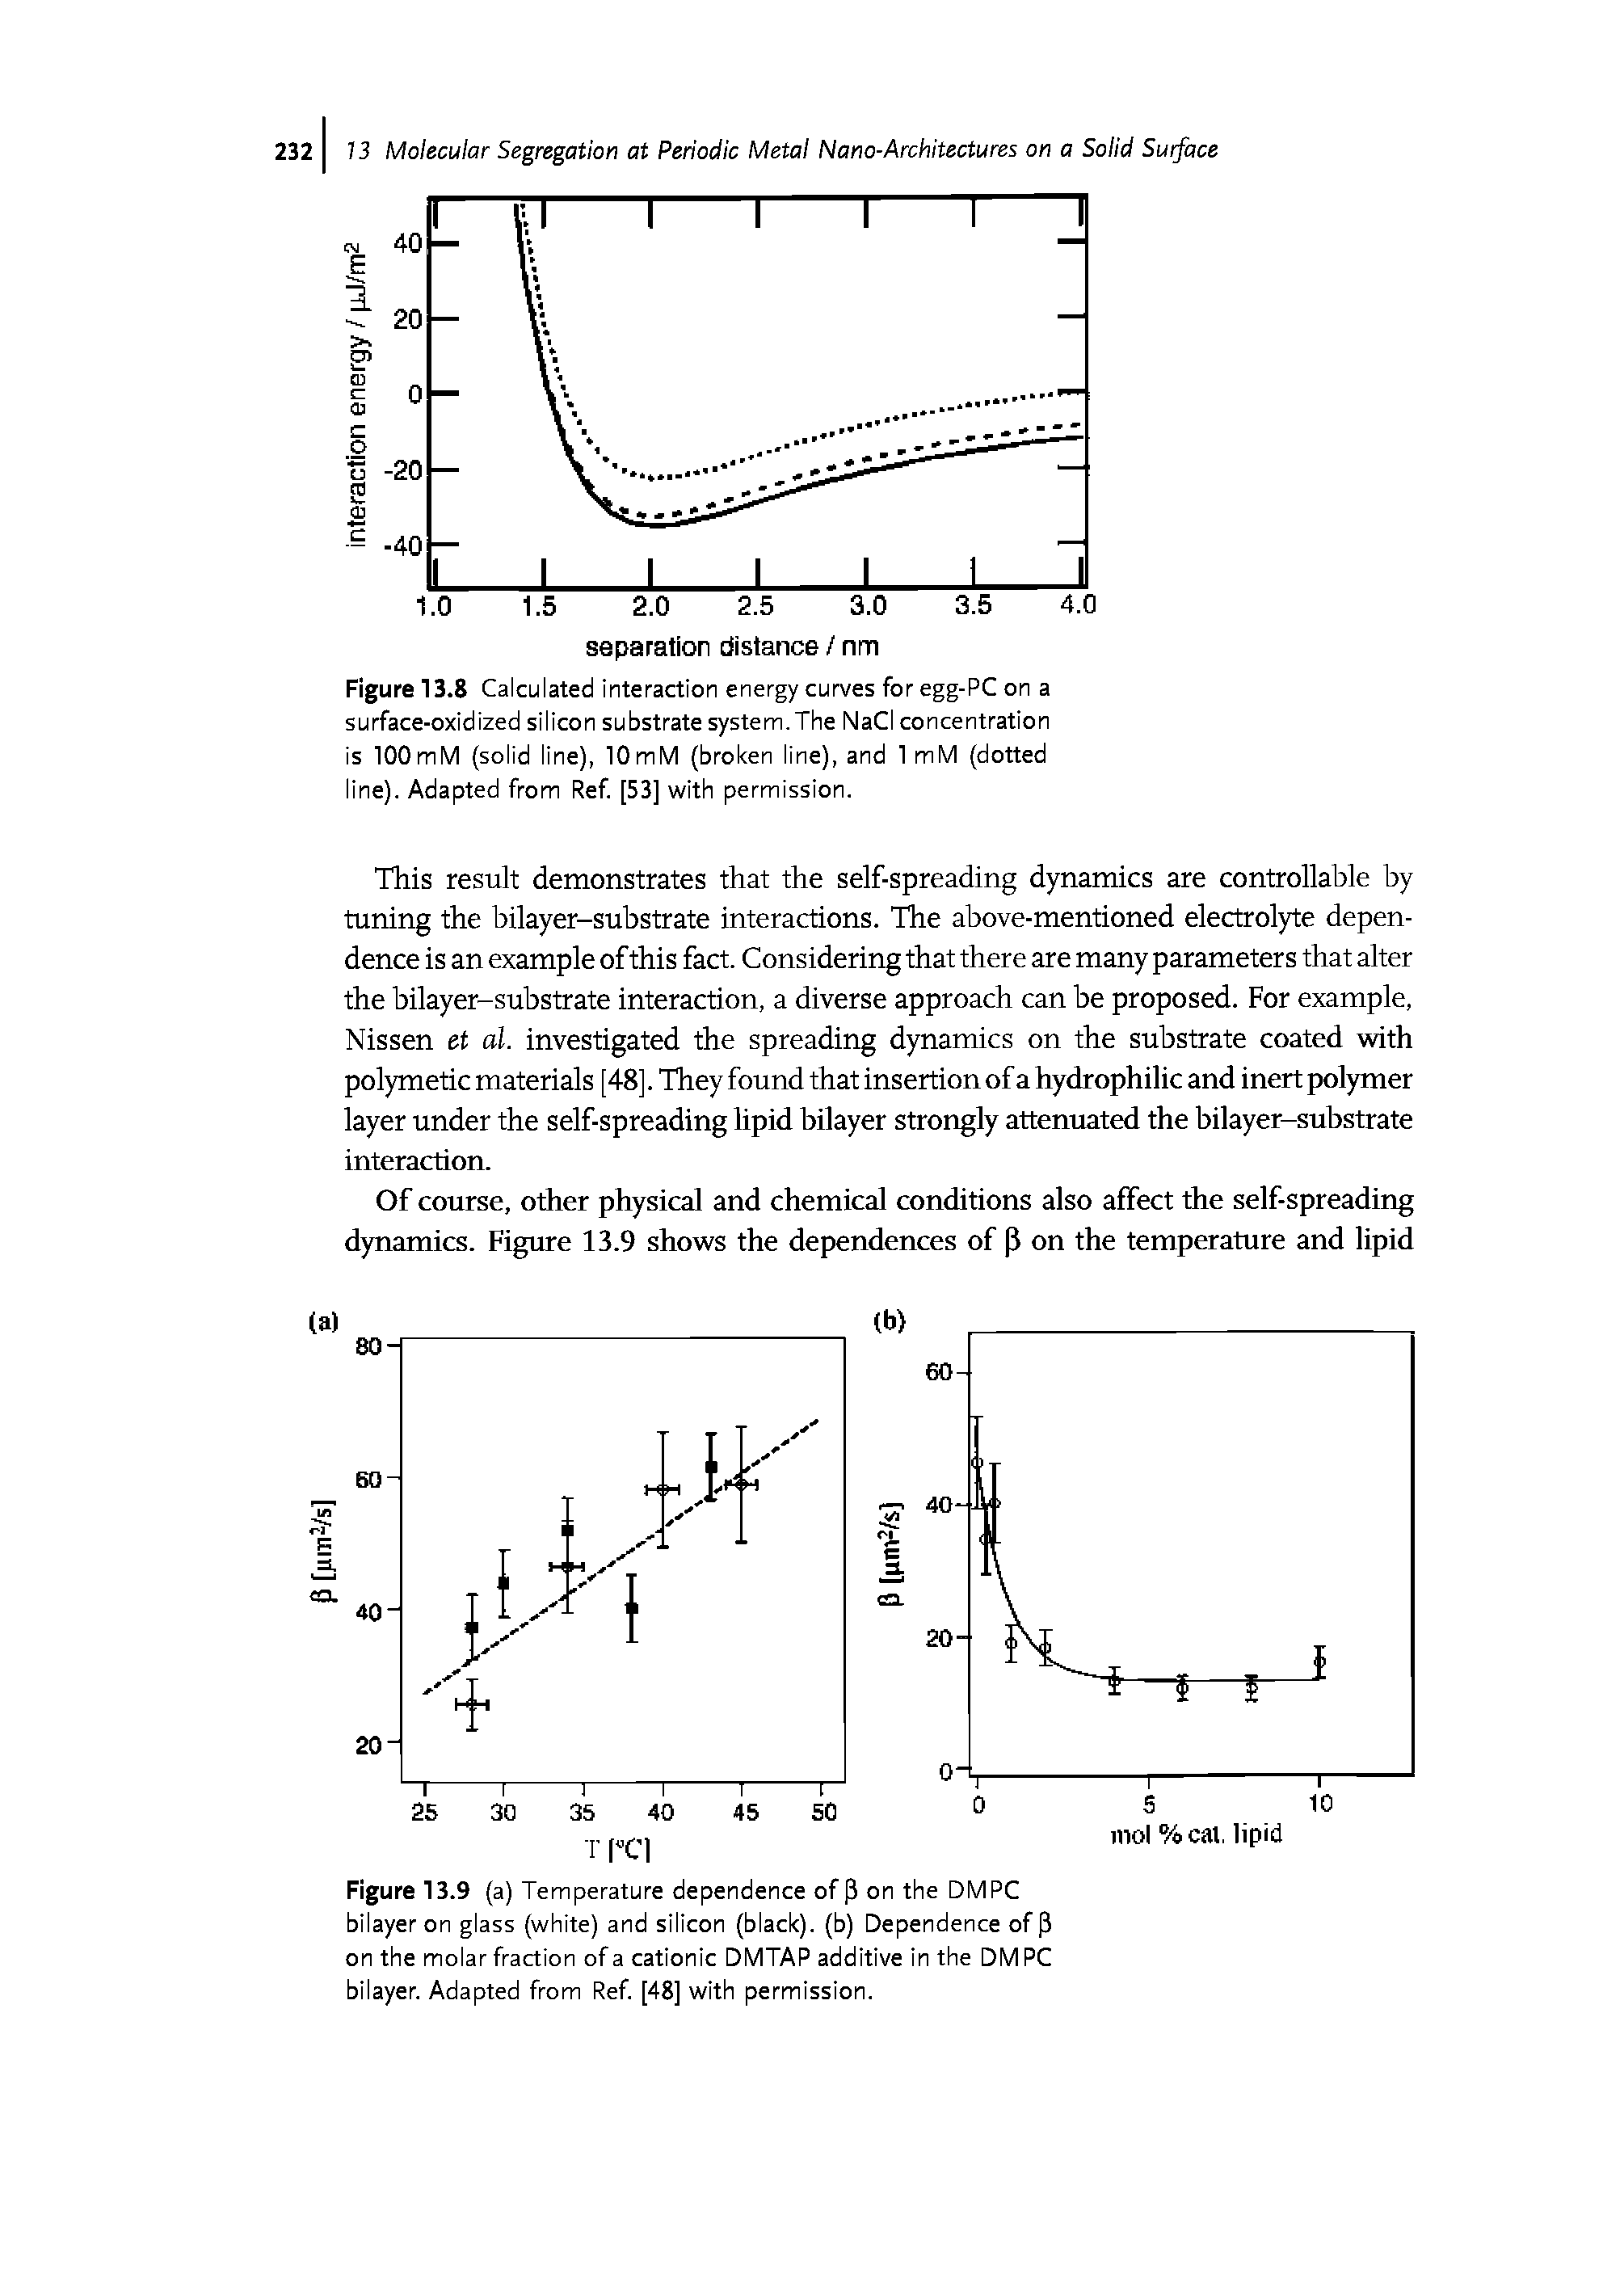 Figure 13.8 Calculated interaction energy curves for egg-PC on a surface-oxidized silicon substrate system.The NaCI concentration is 100mM (solid line), 10mM (broken line), and 1 mM (dotted line). Adapted from Ref [53] with permission.